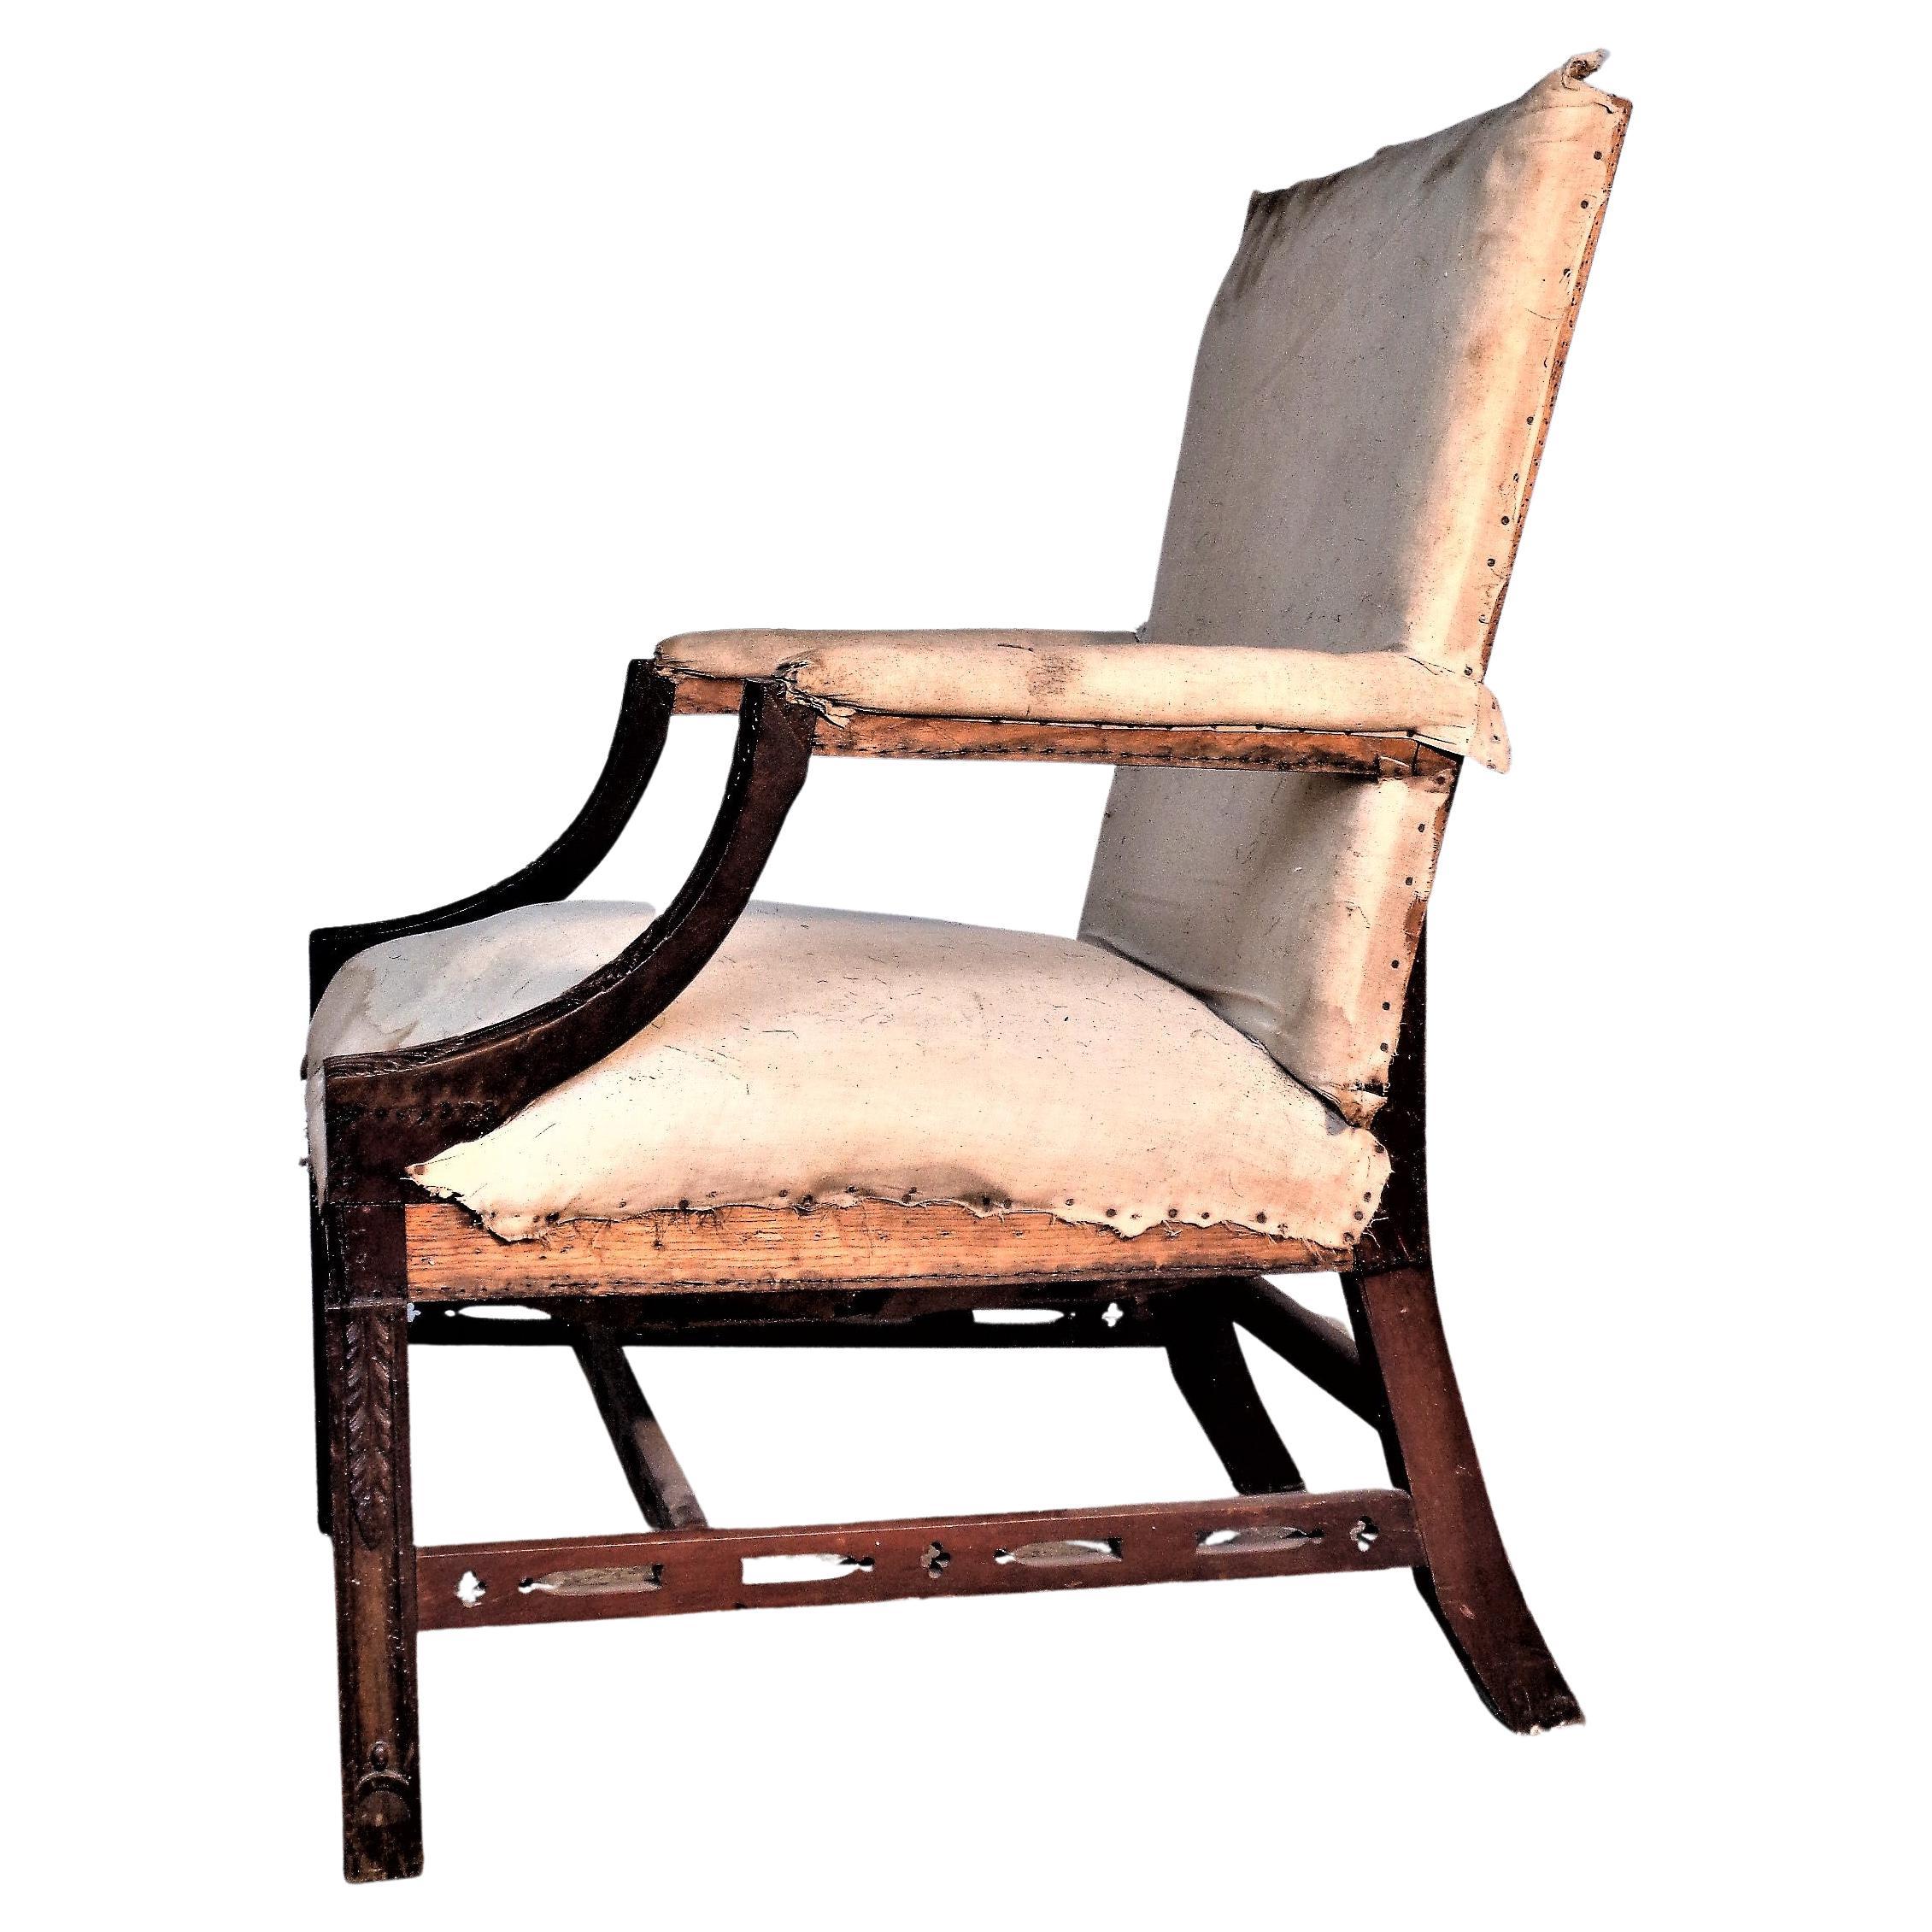 Hand-Carved George III Style Carved Lolling Chair, circa 1870